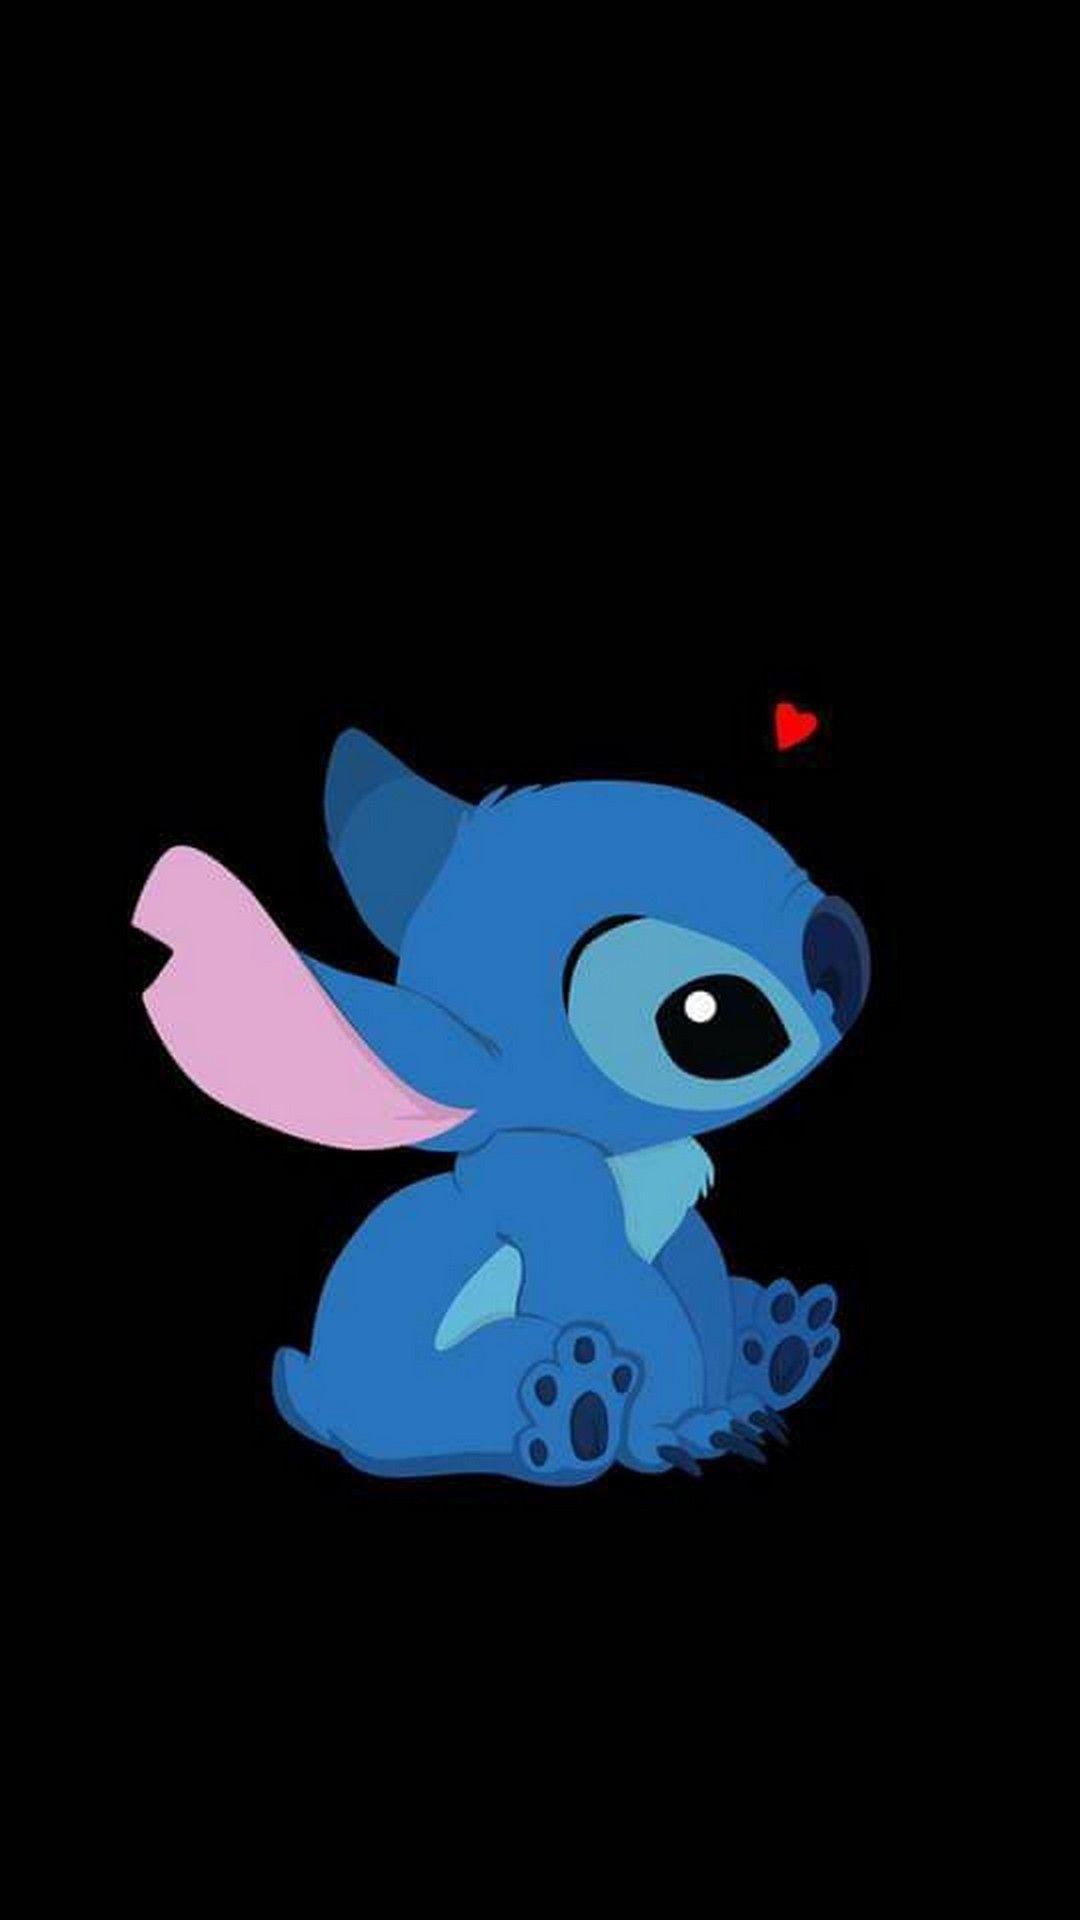 1080 x 1920 · jpeg - Cute Lilo and Stitch Wallpapers - Top Free Cute Lilo and Stitch ...